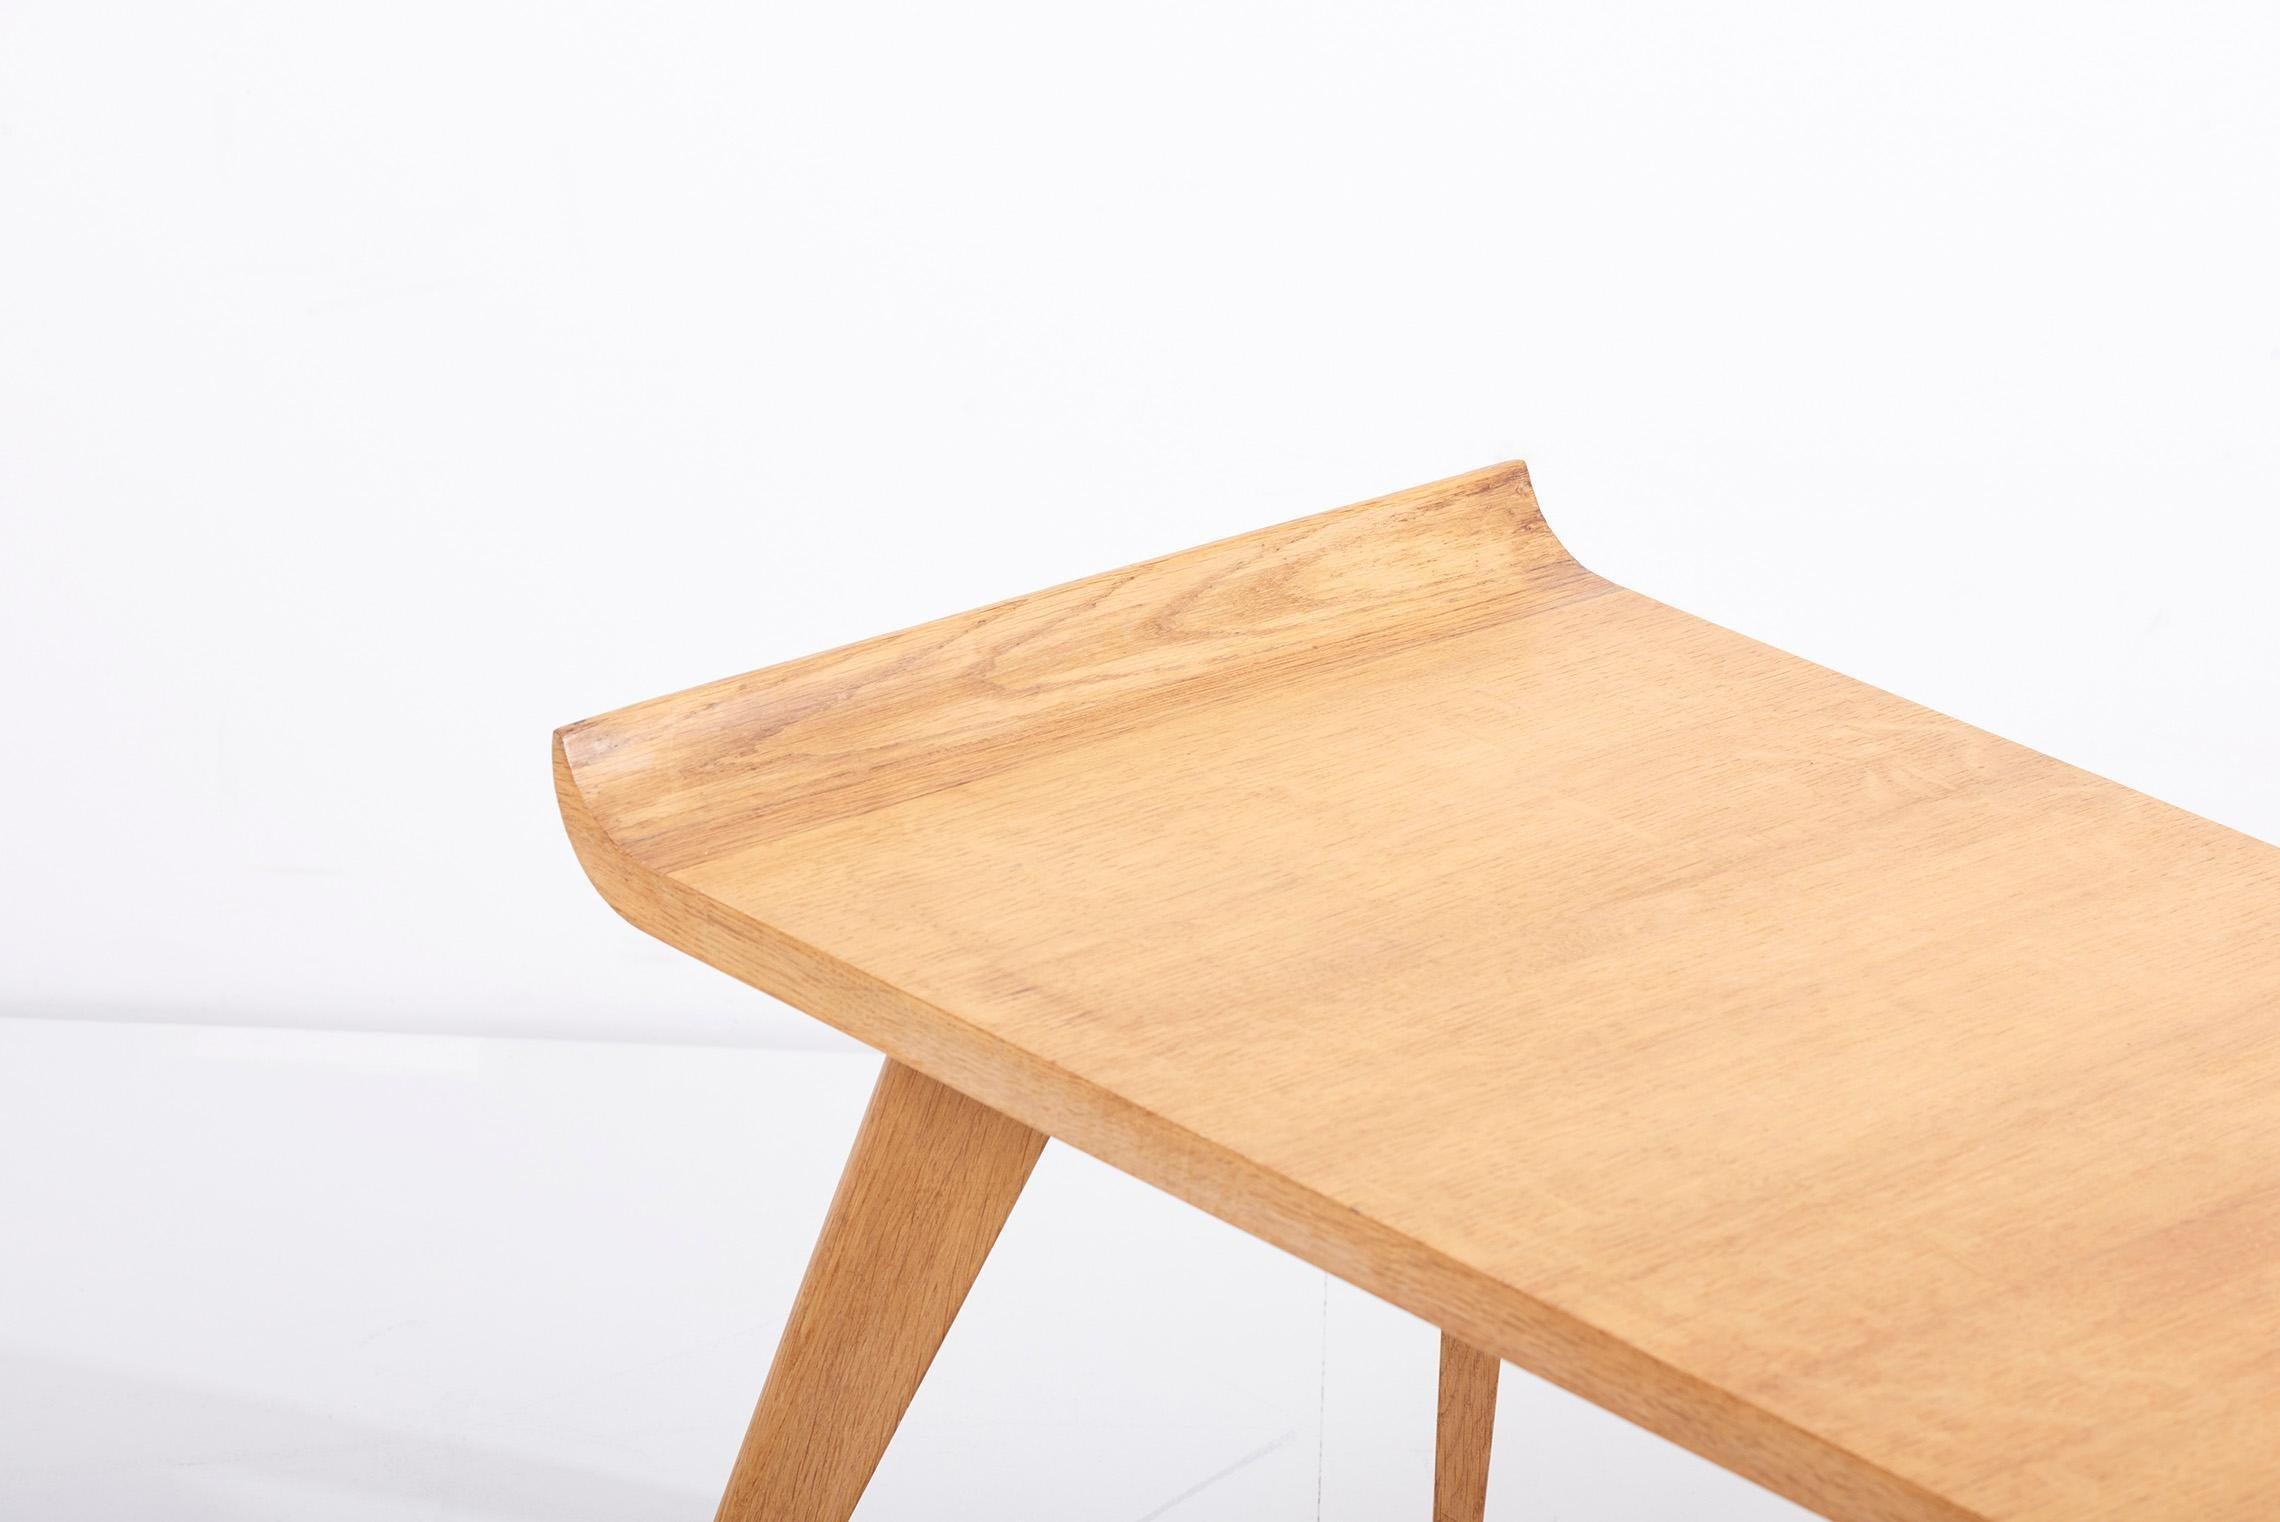 Mid-20th Century Spanish Modernist Pagoda Coffee or Side Table in Oak by Manuel Barbero 1953 For Sale